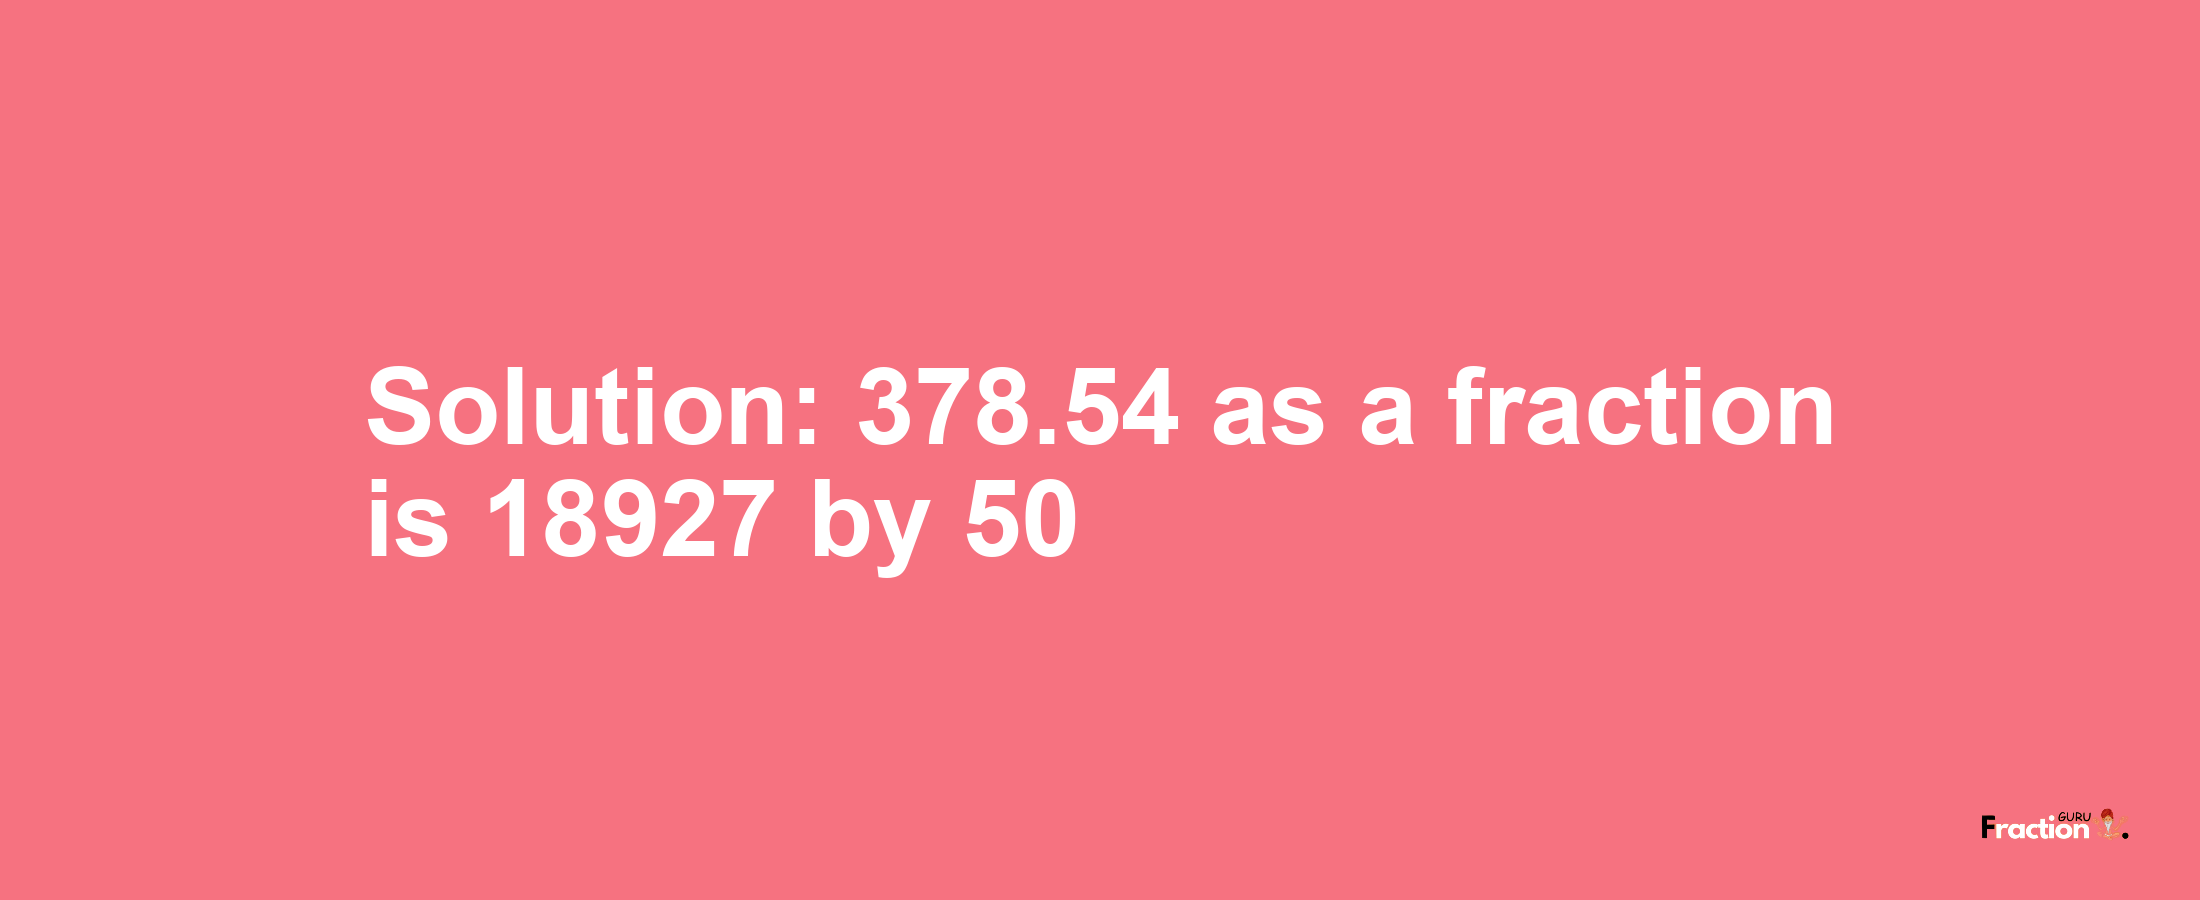 Solution:378.54 as a fraction is 18927/50